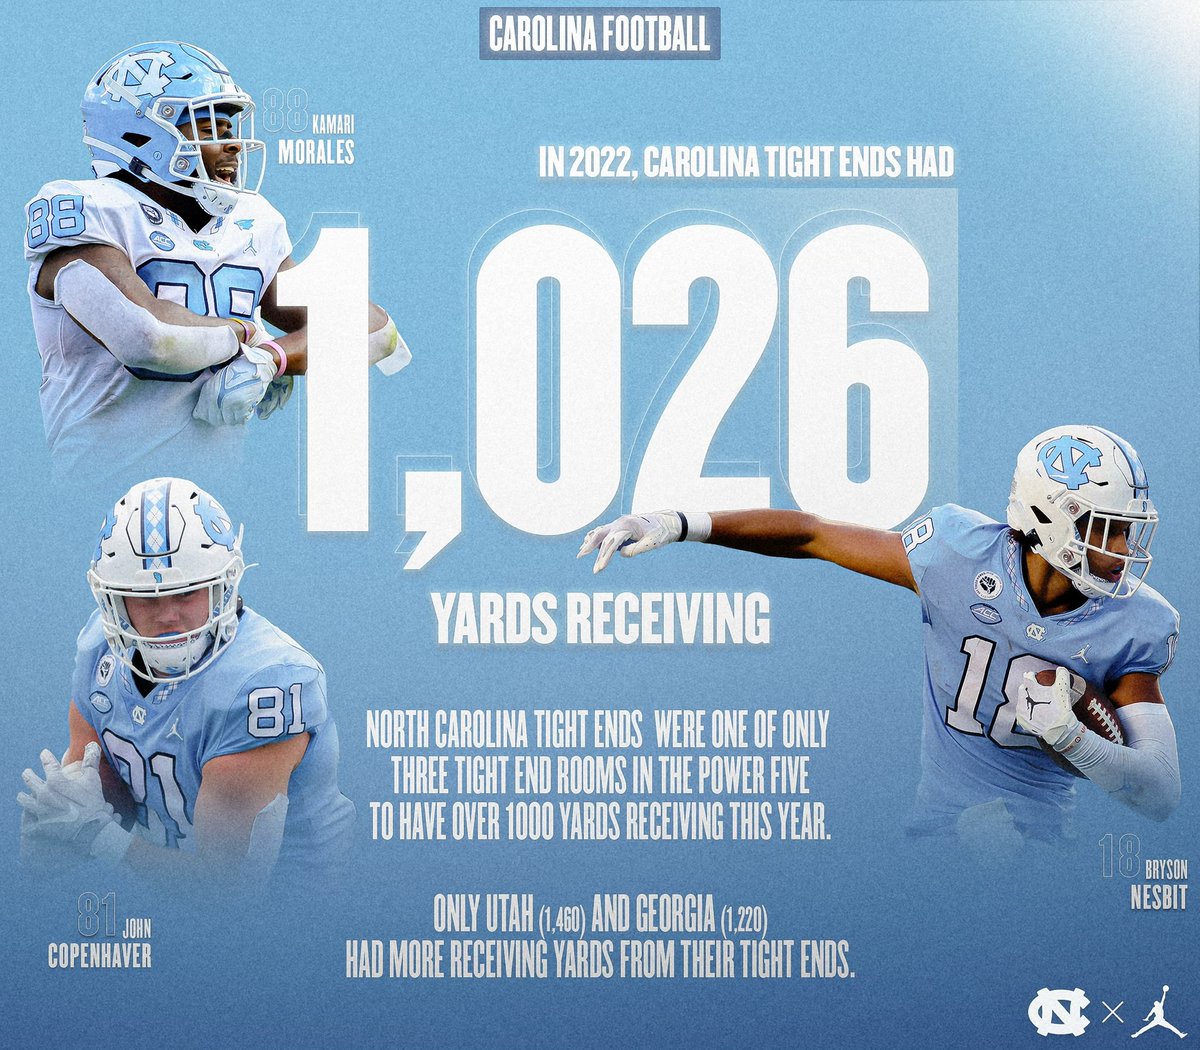 Our tight end group was among the nation’s best this season 🚀 #CarolinaFootball 🏈 #UNCommon